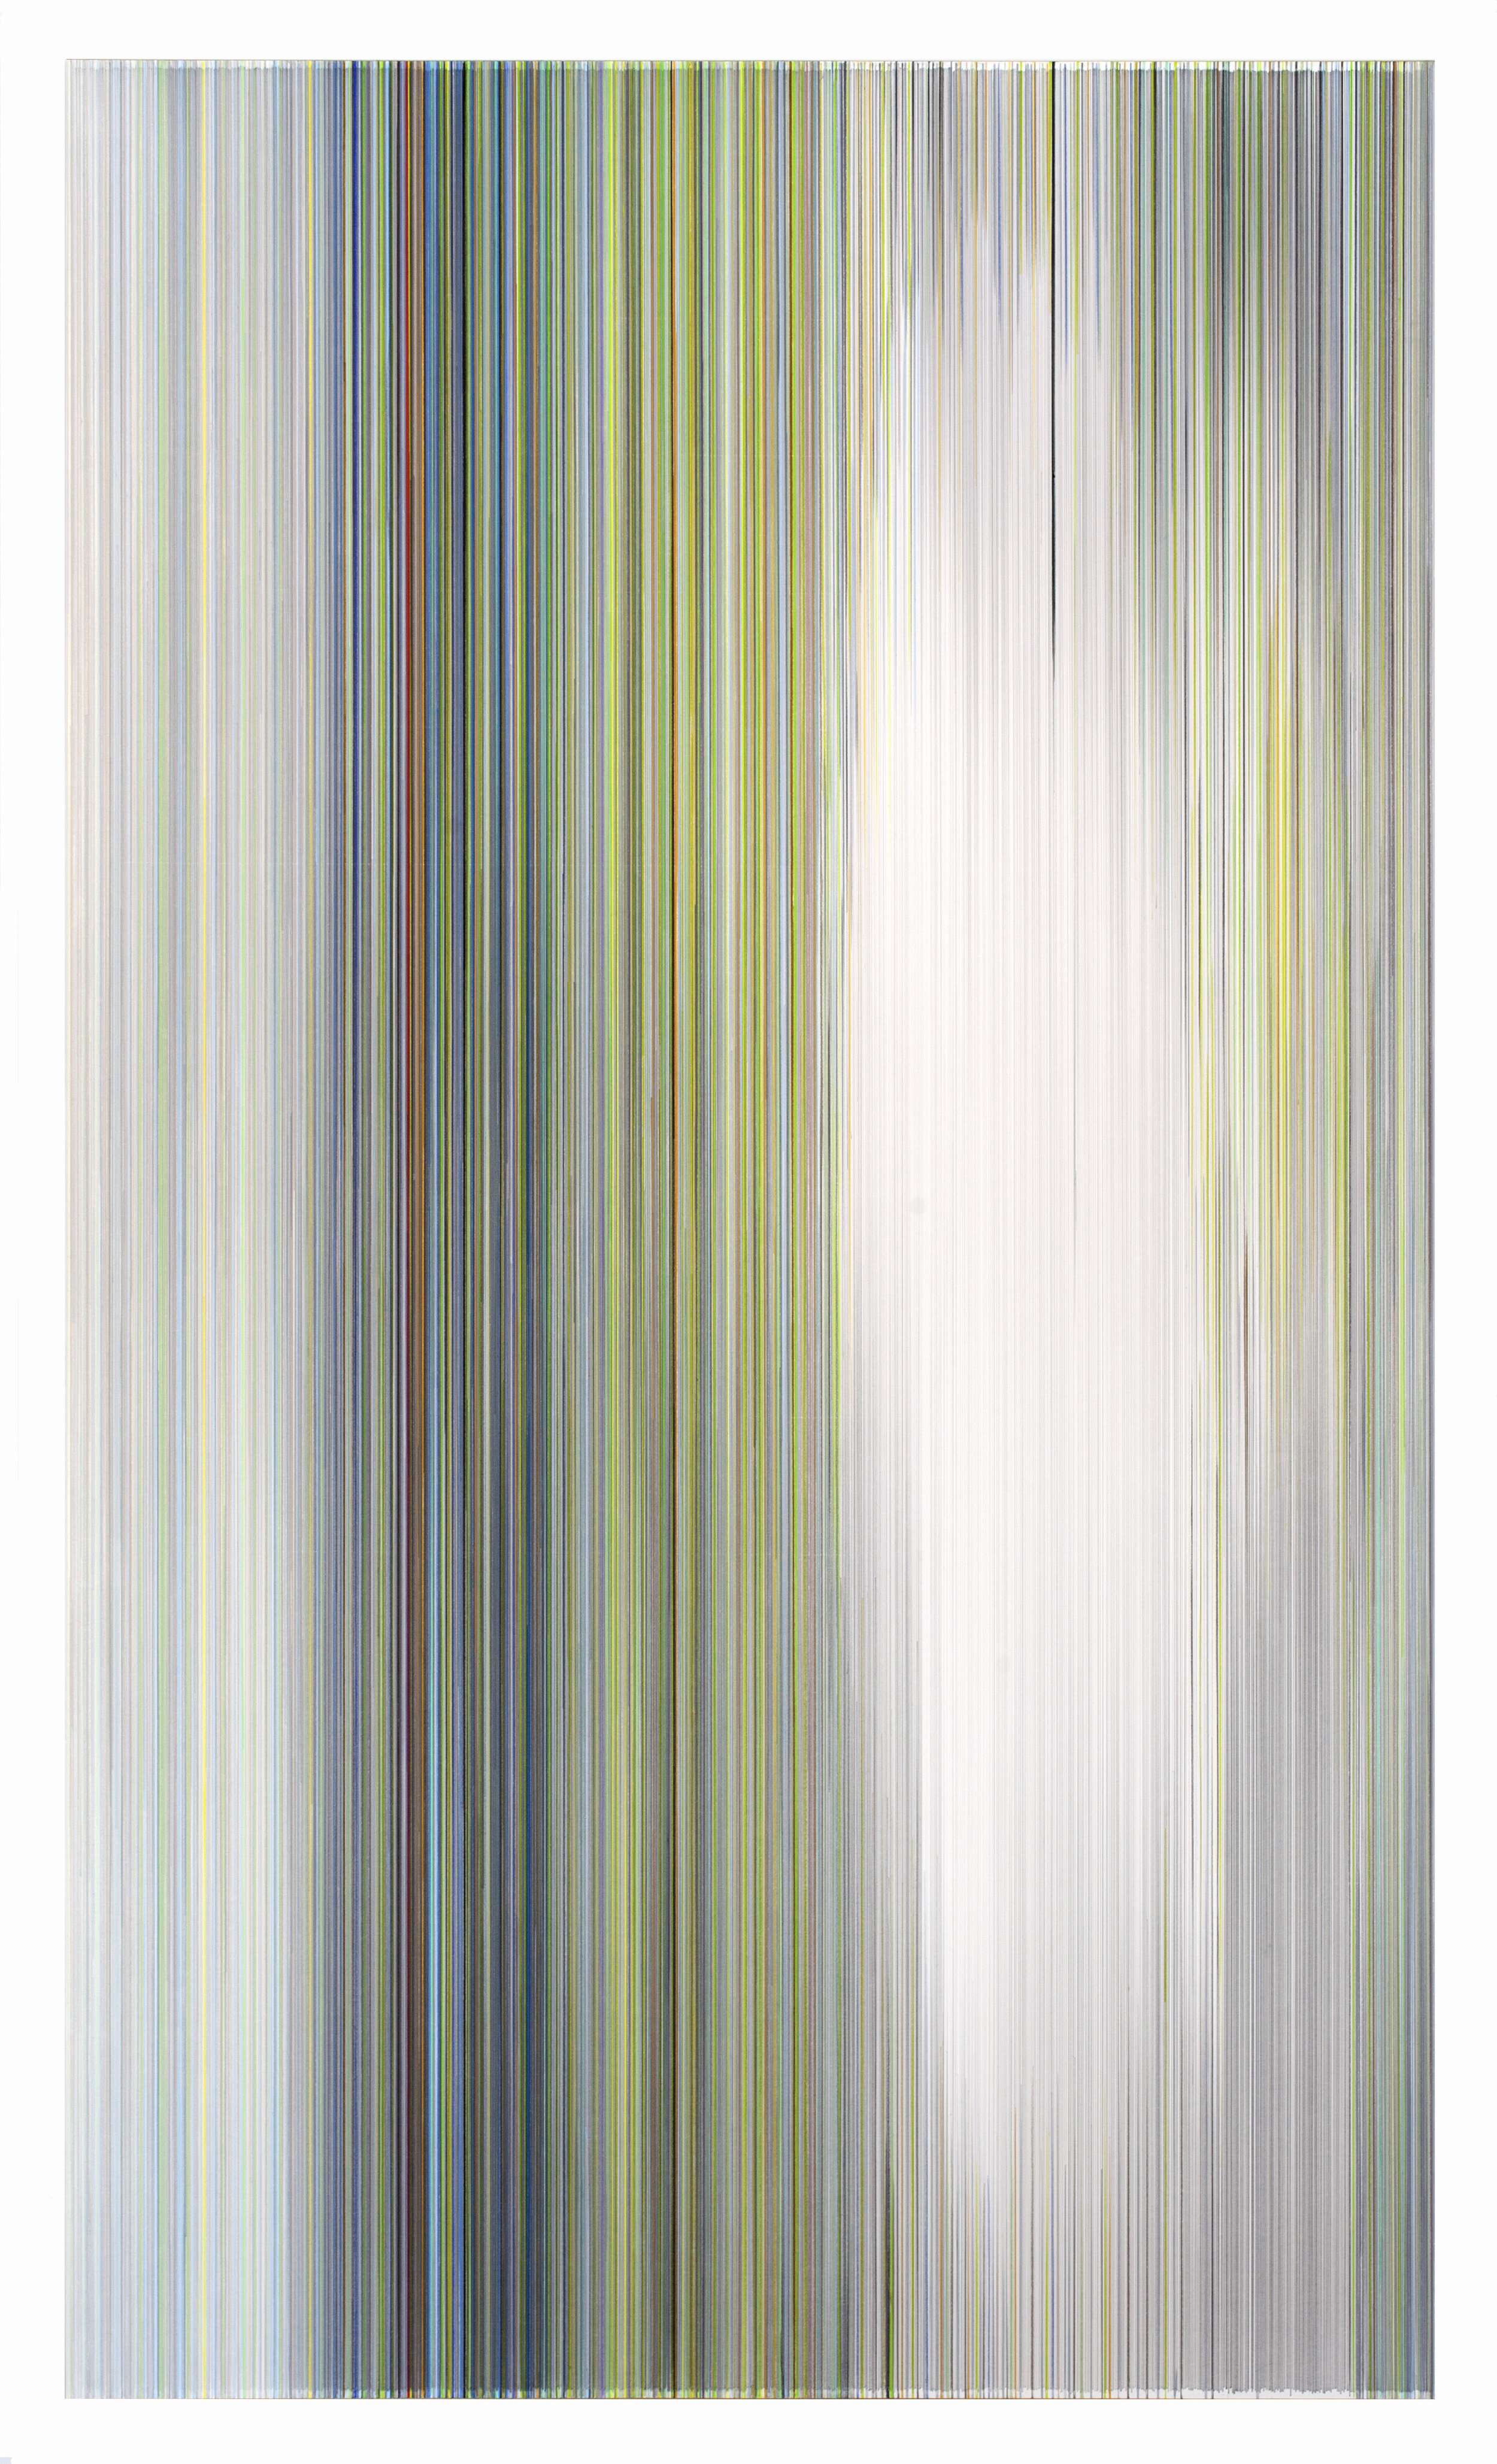    apparition eclipse   2021 graphite and colored pencil on mat board 104 by 59 inches 